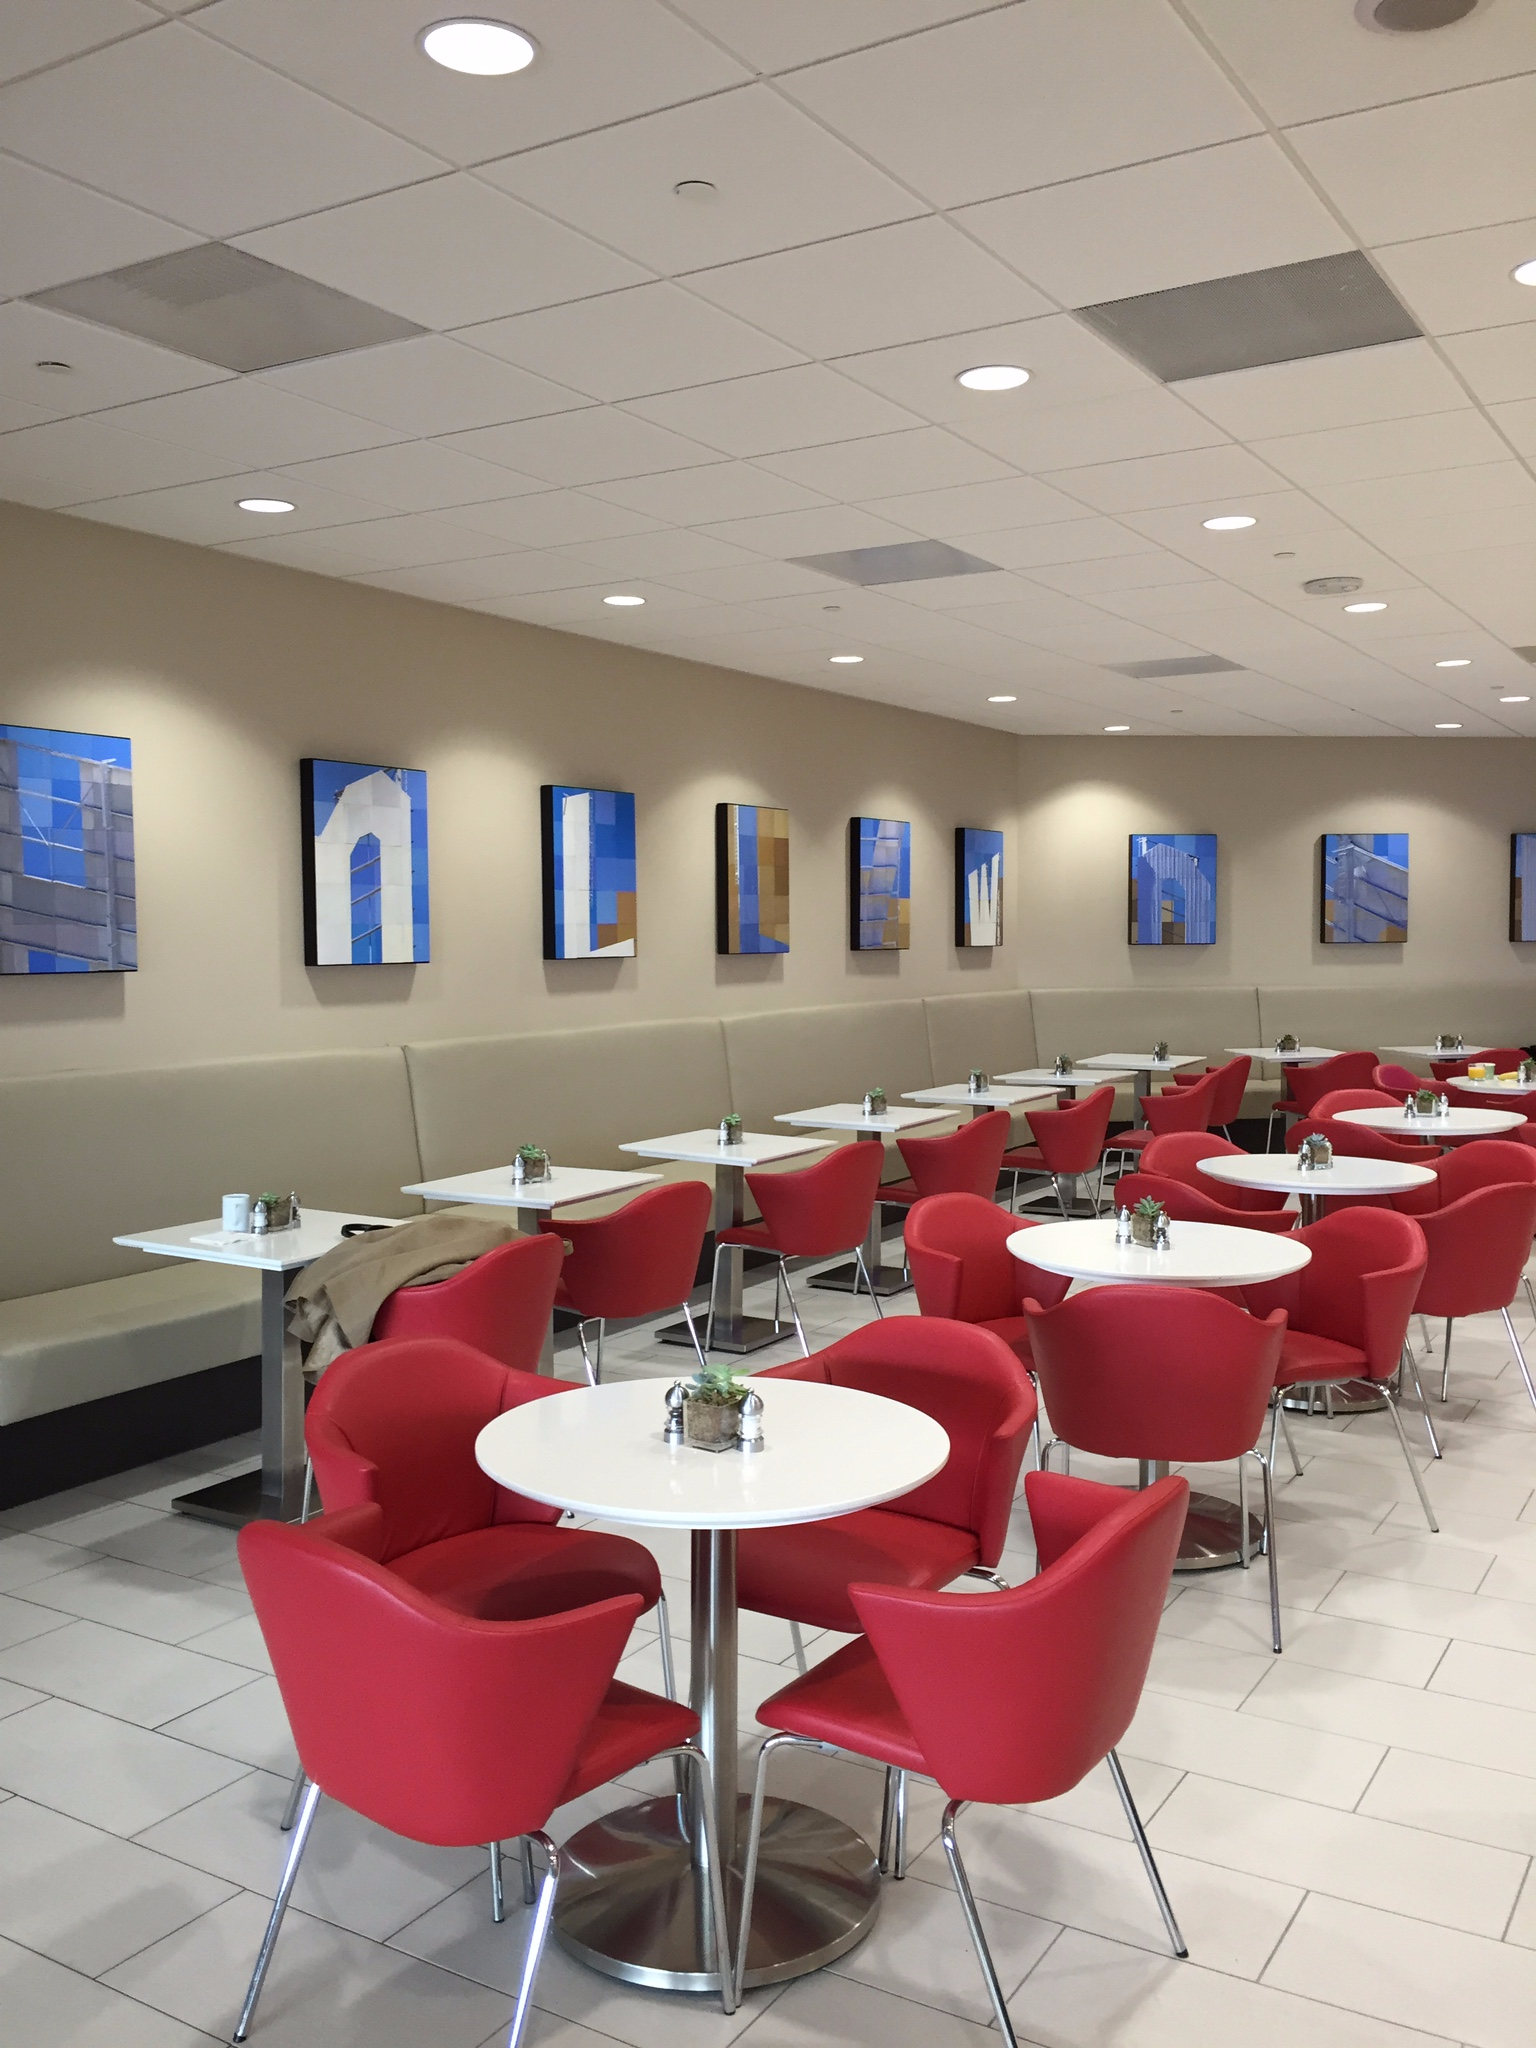 "Cafe"-style seating at Delta Sky Club LAX